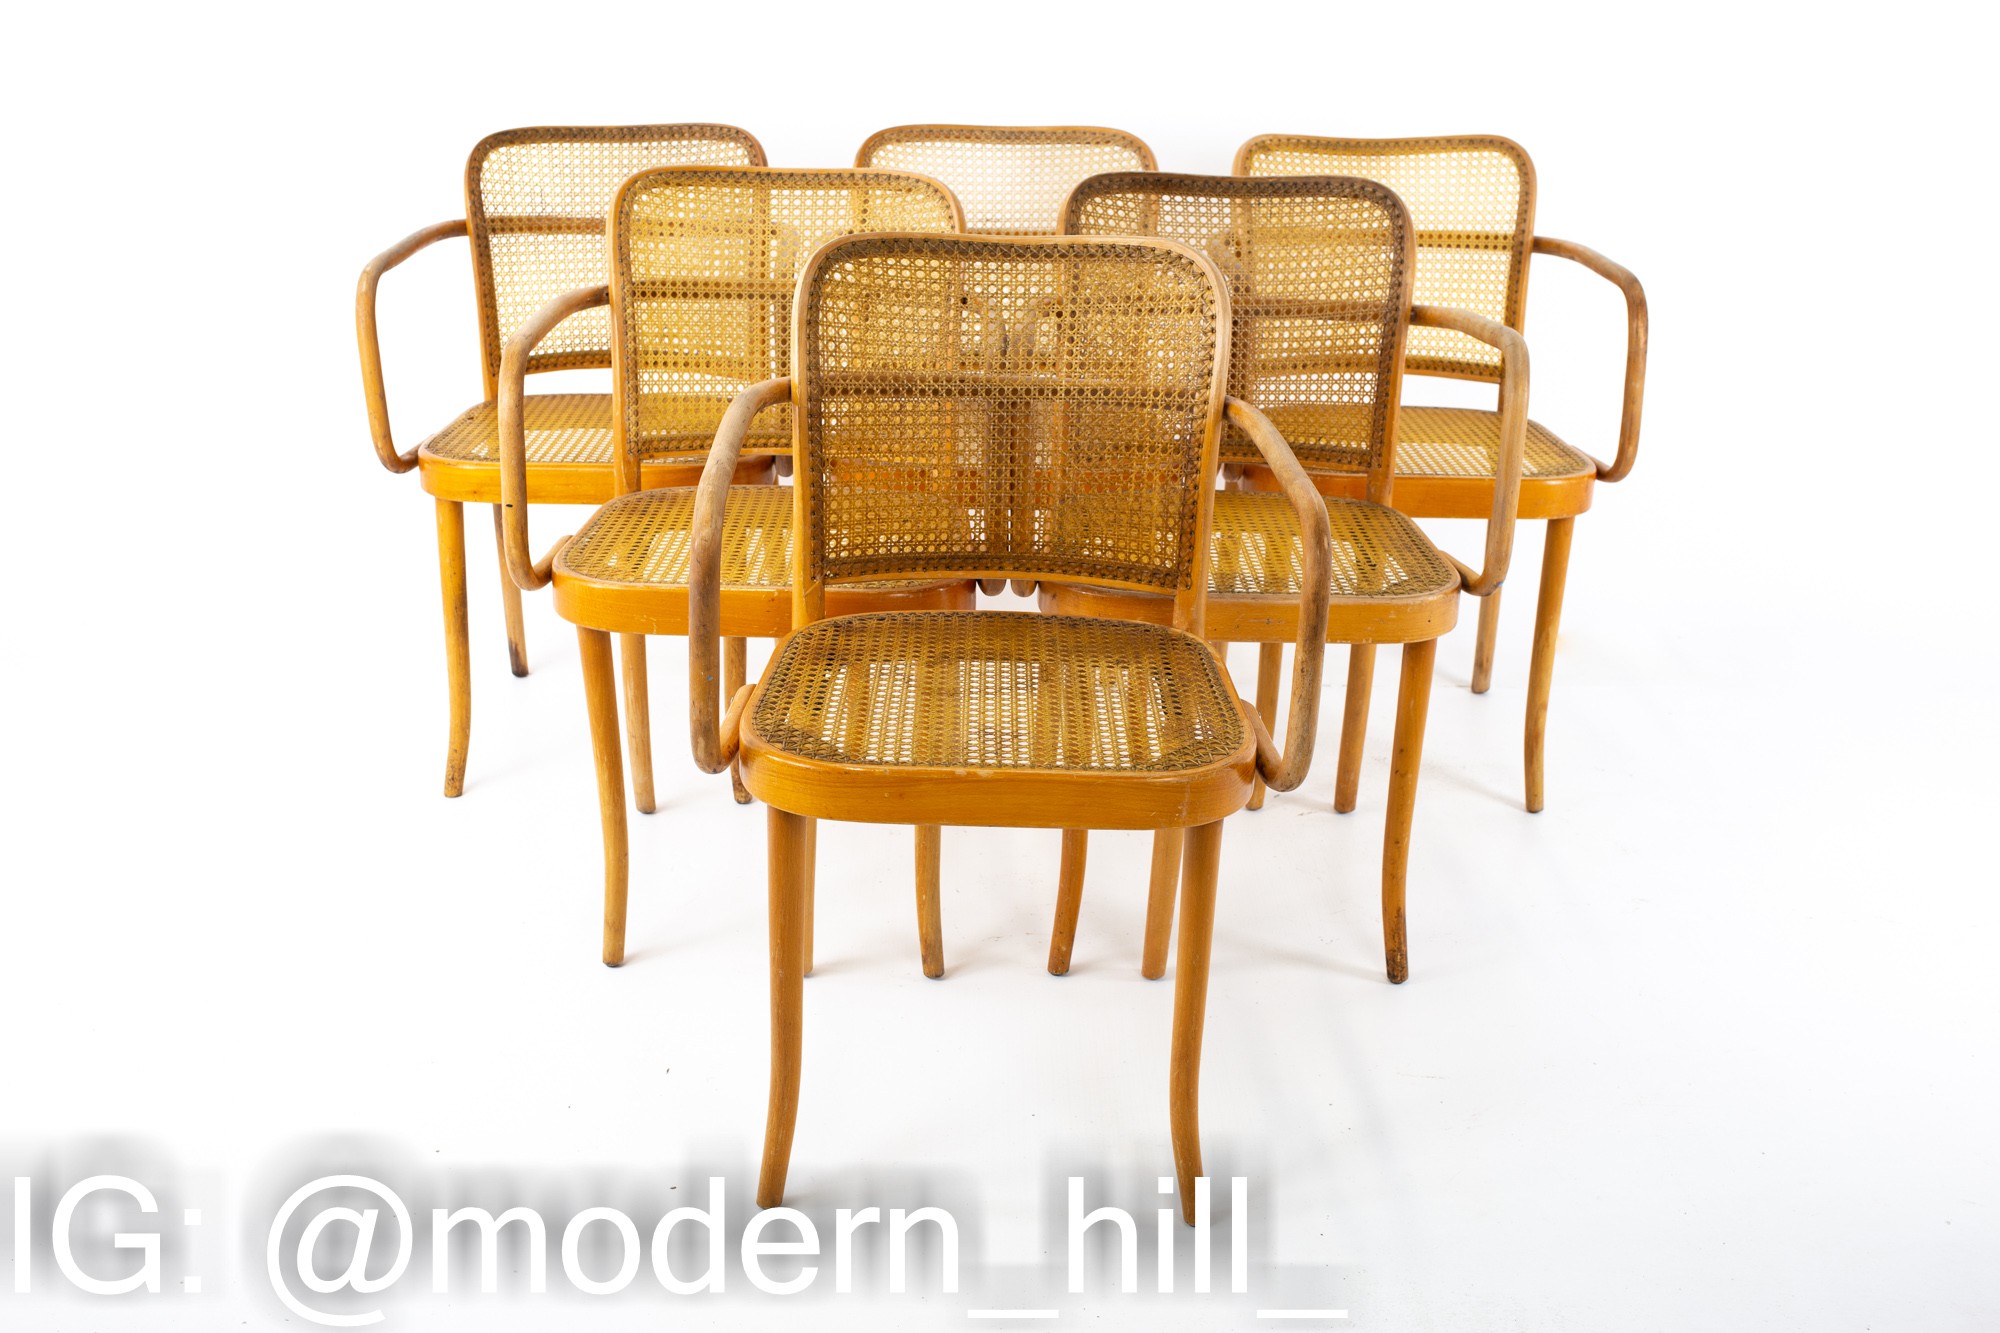 Salvatore Leone Thonet Style Mid Century Bentwood and Cane Dining Chairs - Set of 6